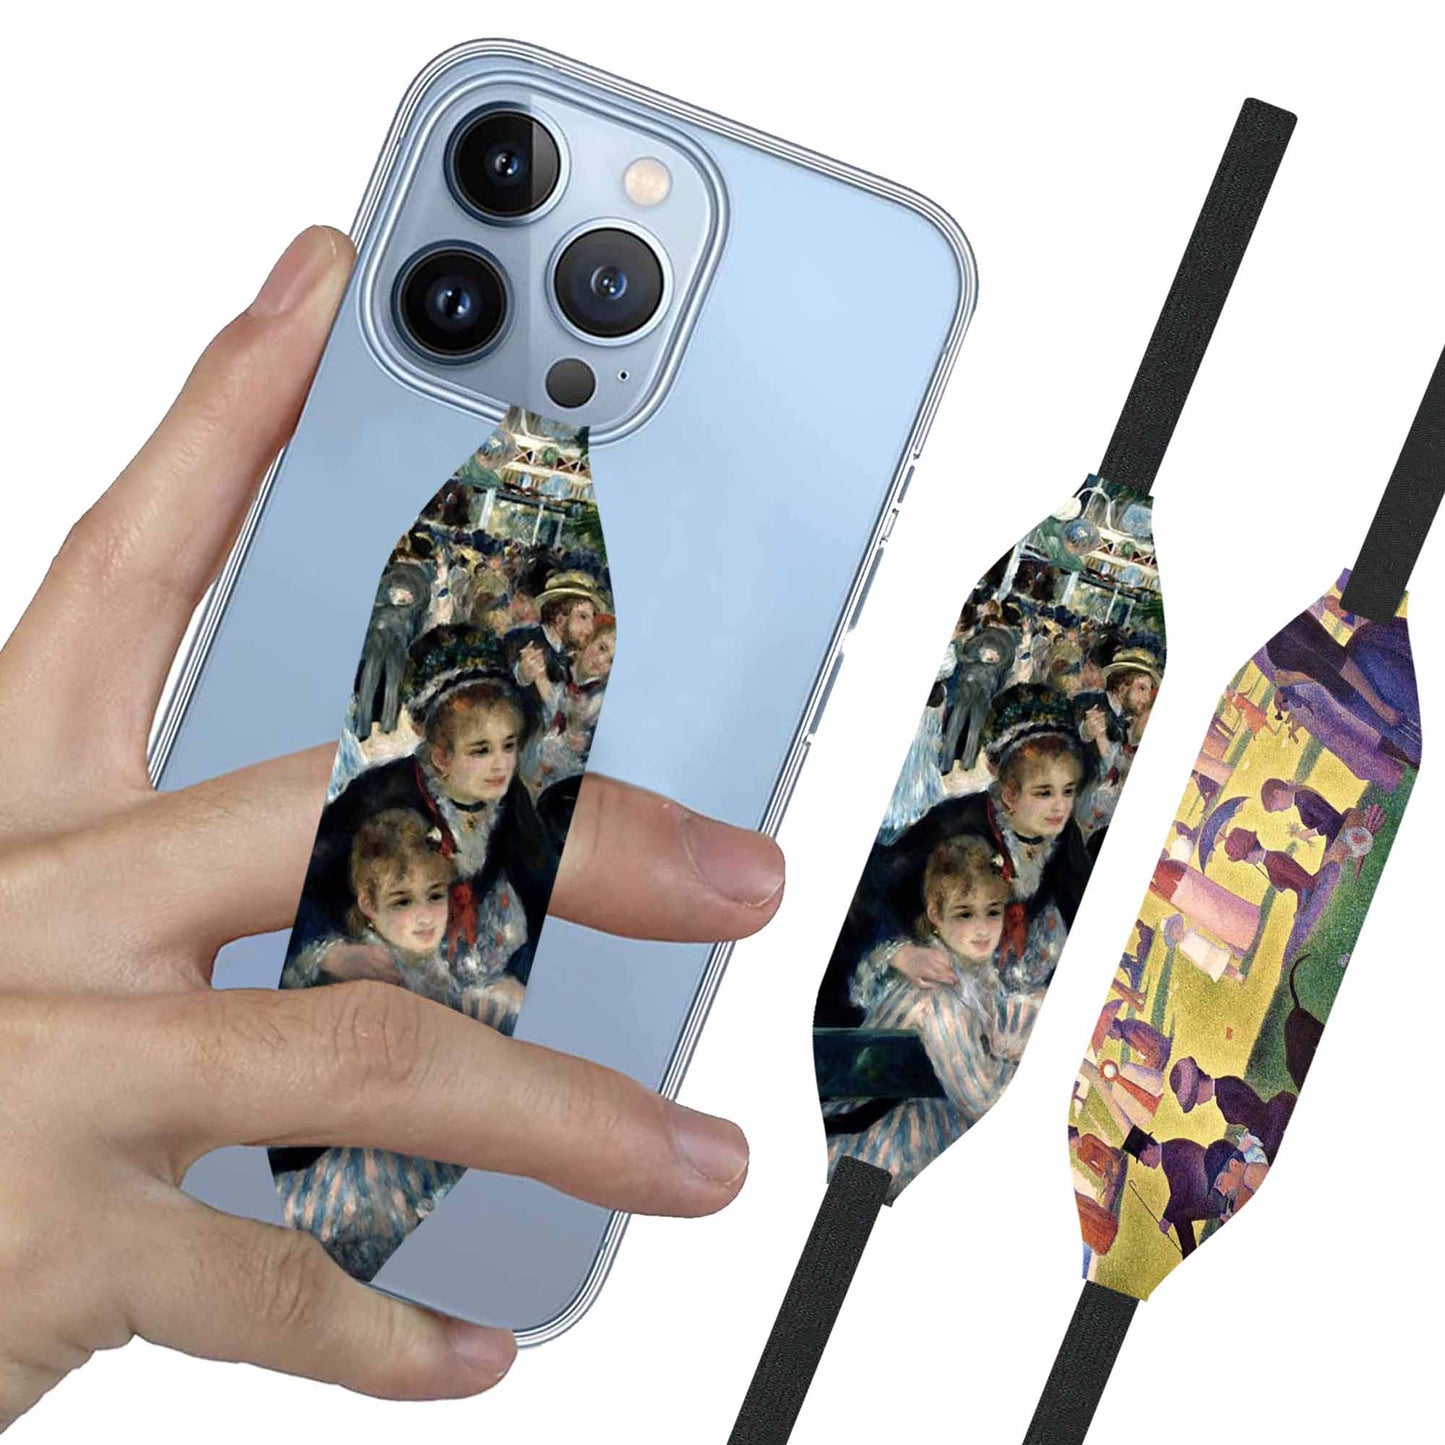 Switchbands Universal Stretchable Phone Hand Straps And Finger Loop For Phone Cases - Sunday Afternoon & The Dance